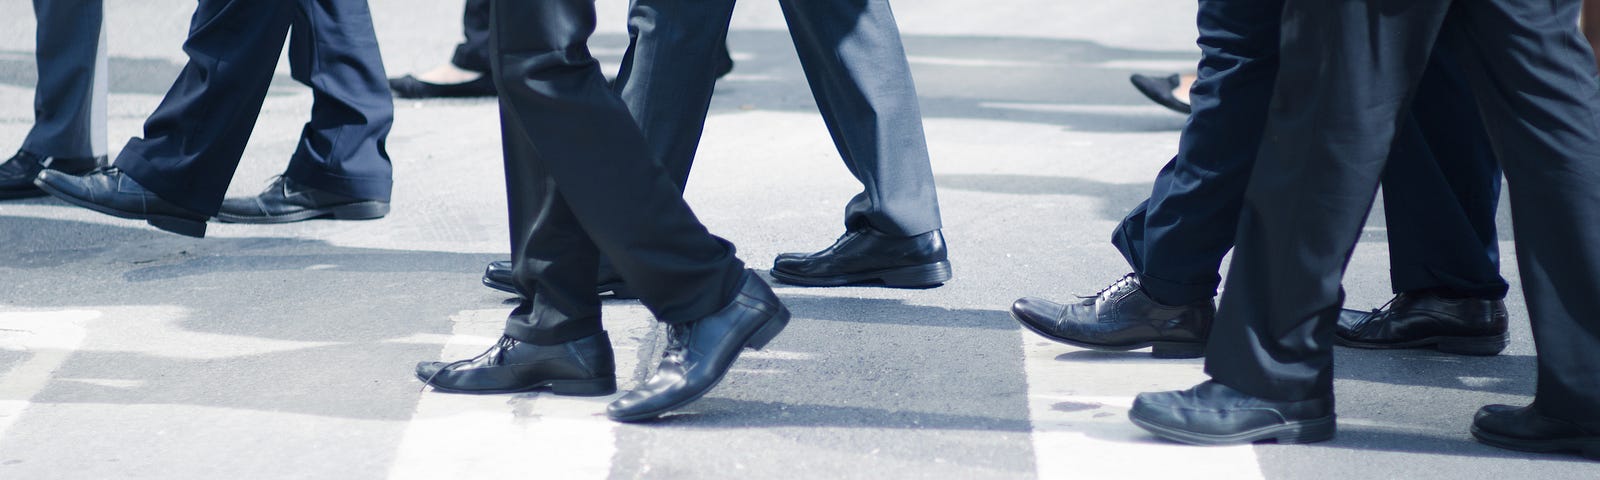 Group of businessmen in similar dark navy suits crossing a city street. You can just barely see the feet of two women.